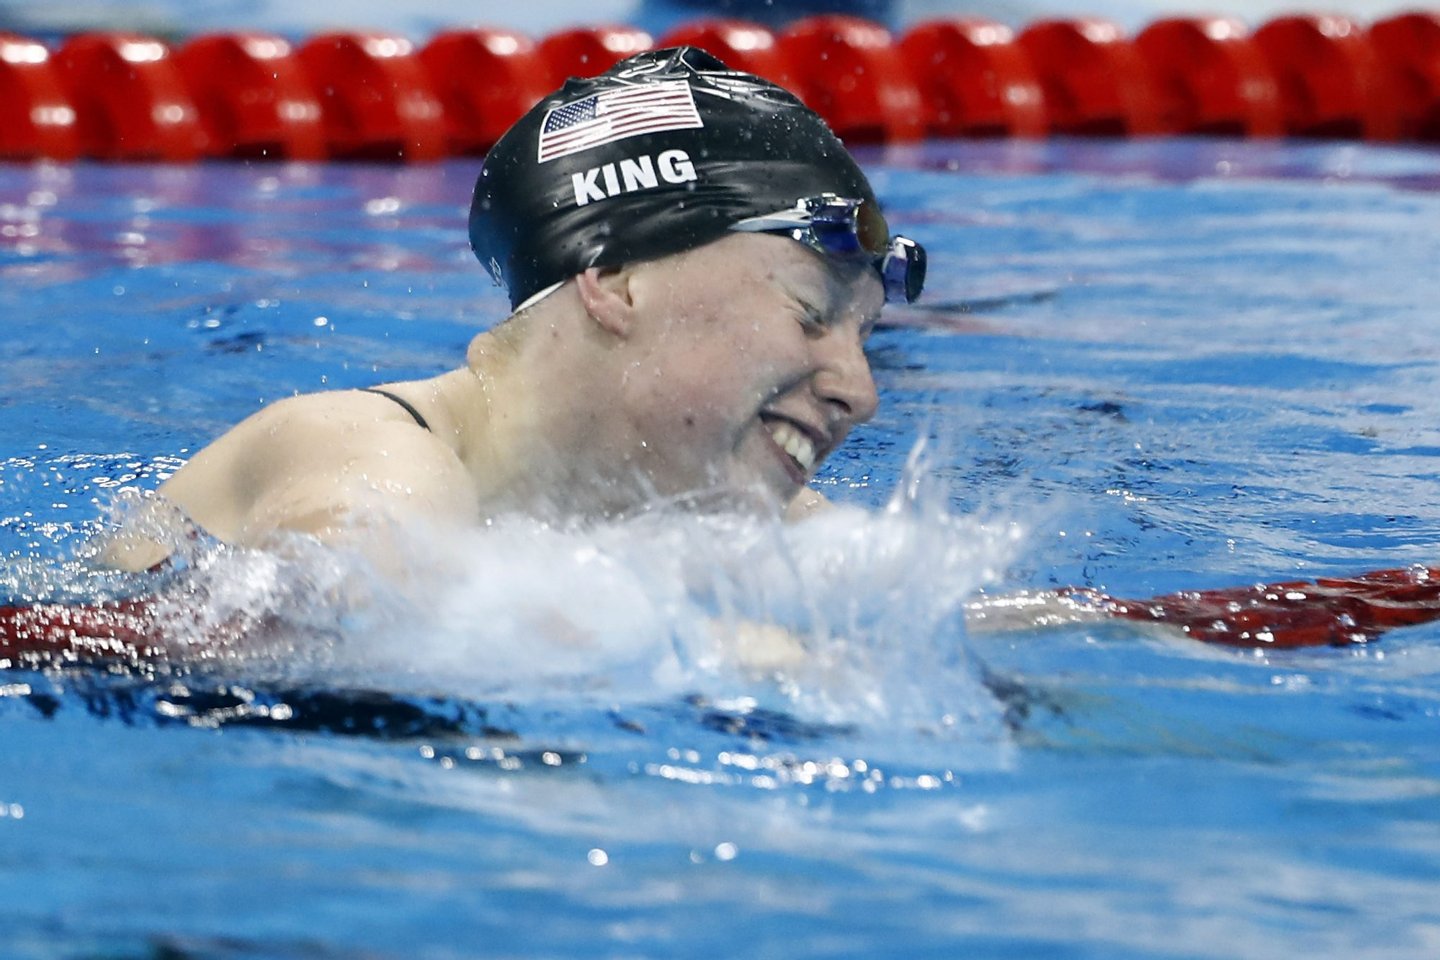 USA's Lilly King celebrates after she broke the Olympic record to win the Women's 100m Breaststroke Final during the swimming event at the Rio 2016 Olympic Games at the Olympic Aquatics Stadium in Rio de Janeiro on August 8, 2016. / AFP / Odd Andersen (Photo credit should read ODD ANDERSEN/AFP/Getty Images)